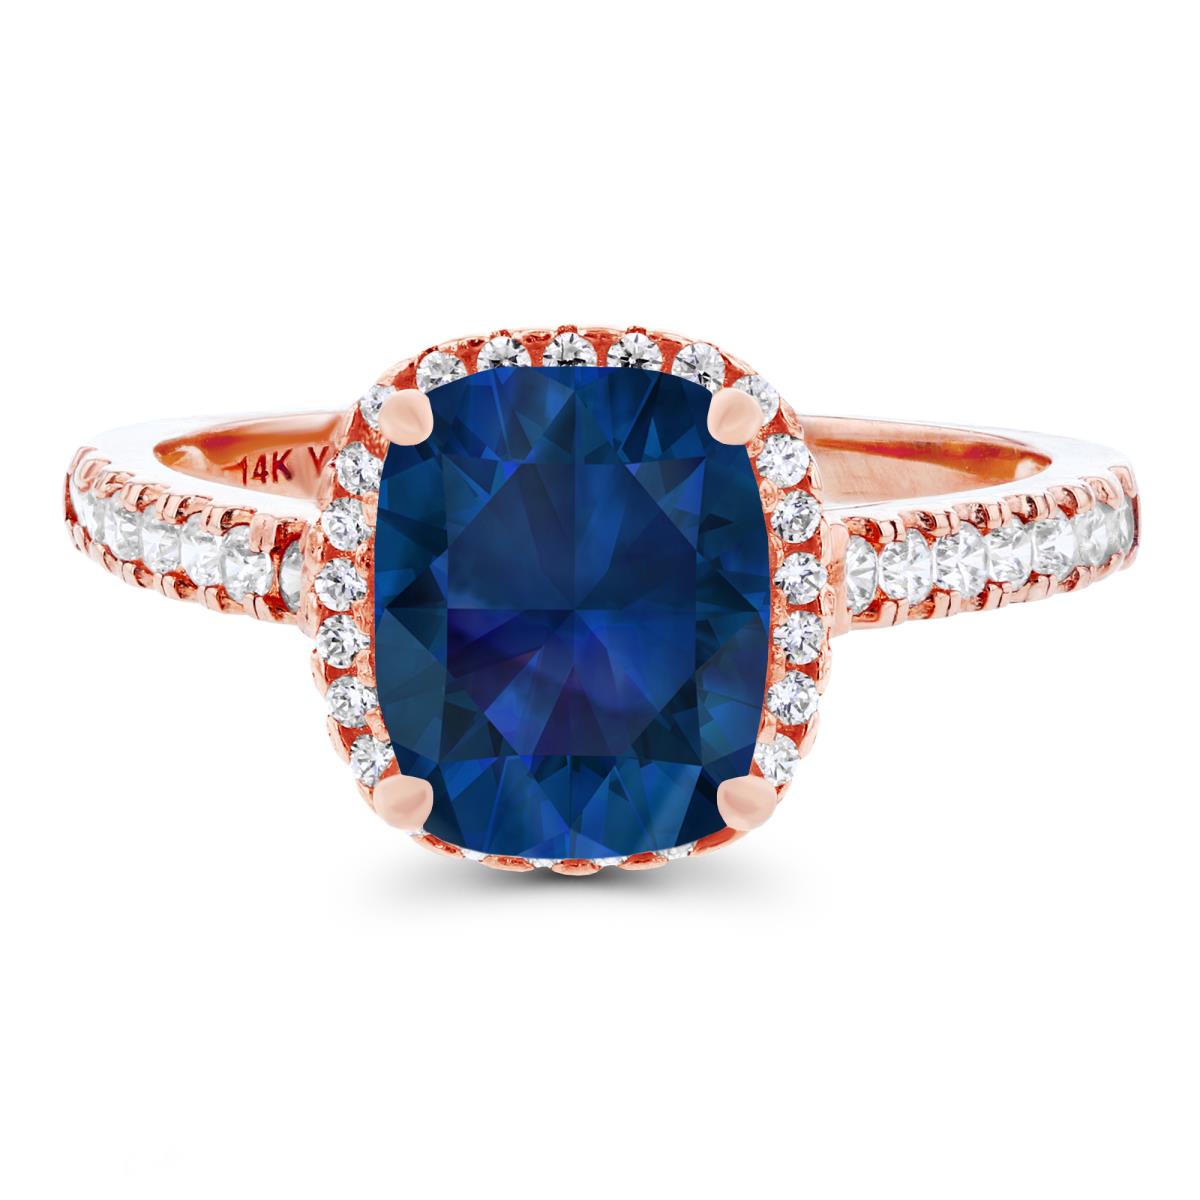 14K Rose Gold 9x7mm Cushion Created Blue Sapphire & Created White Sapphire Halo Ring